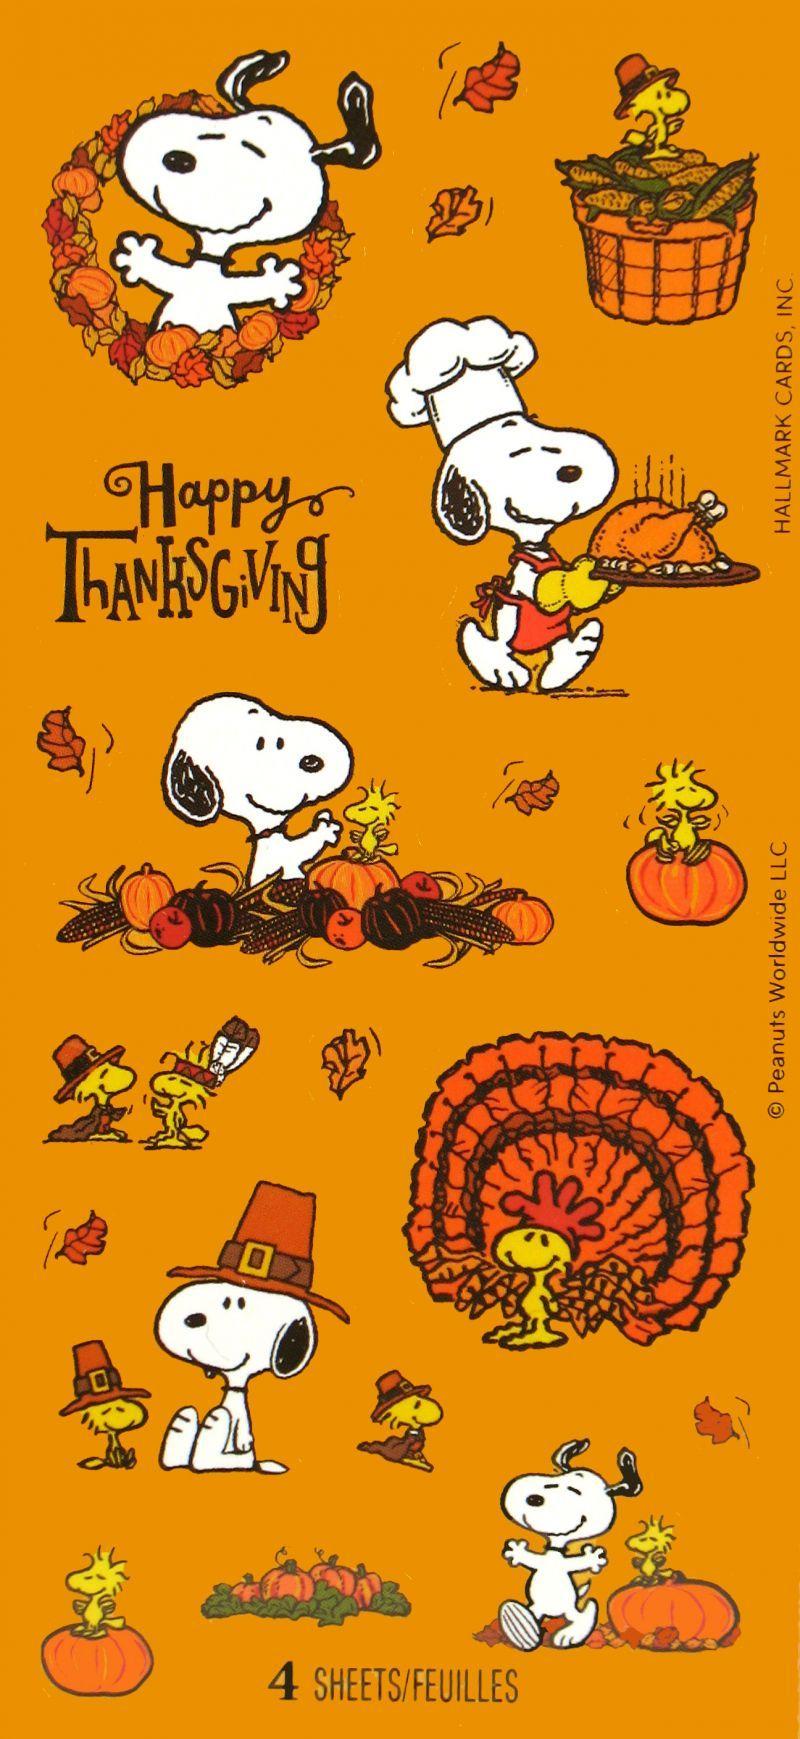 Thanksgiving. Thanksgiving snoopy, Snoopy